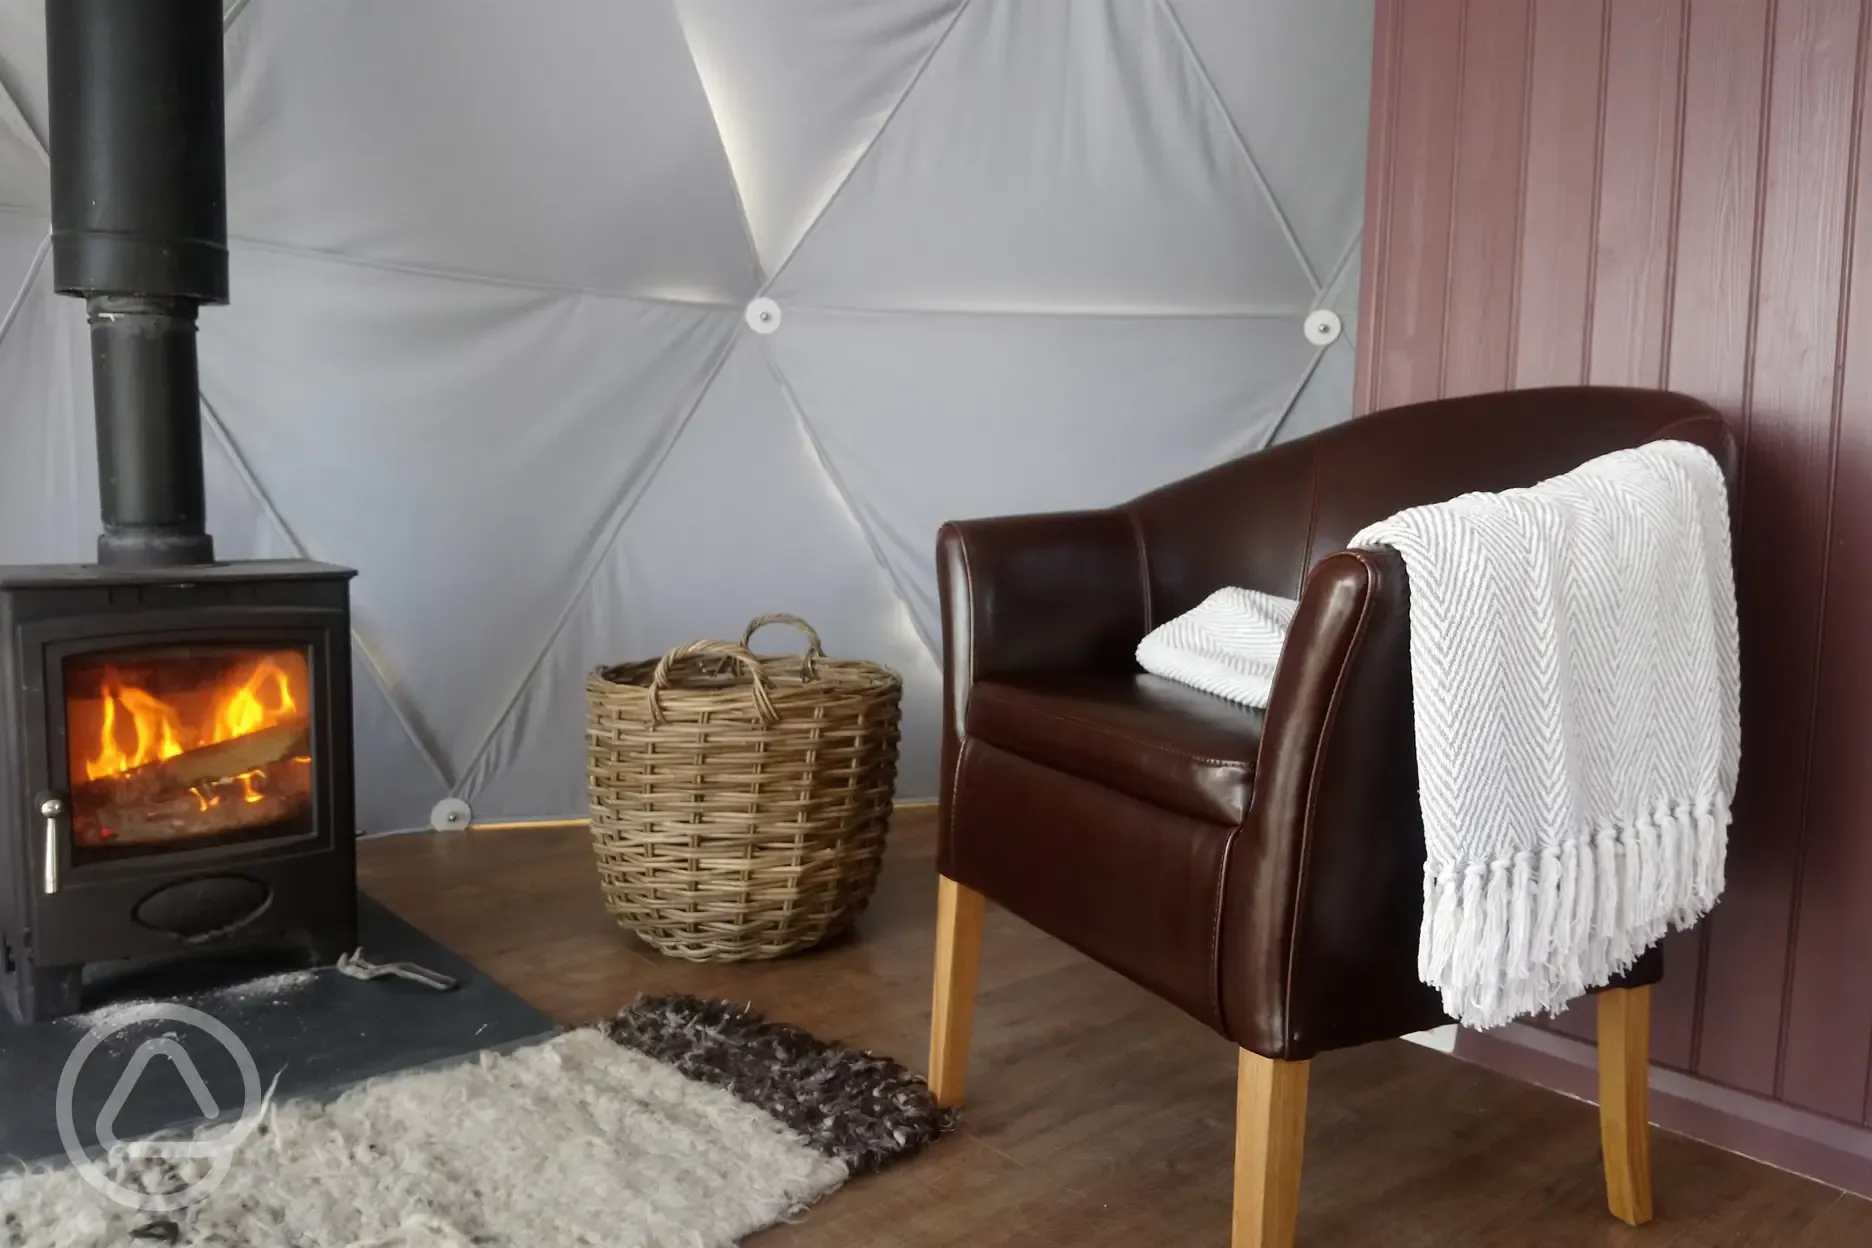 The Glamping Dome has a cosy woodburner